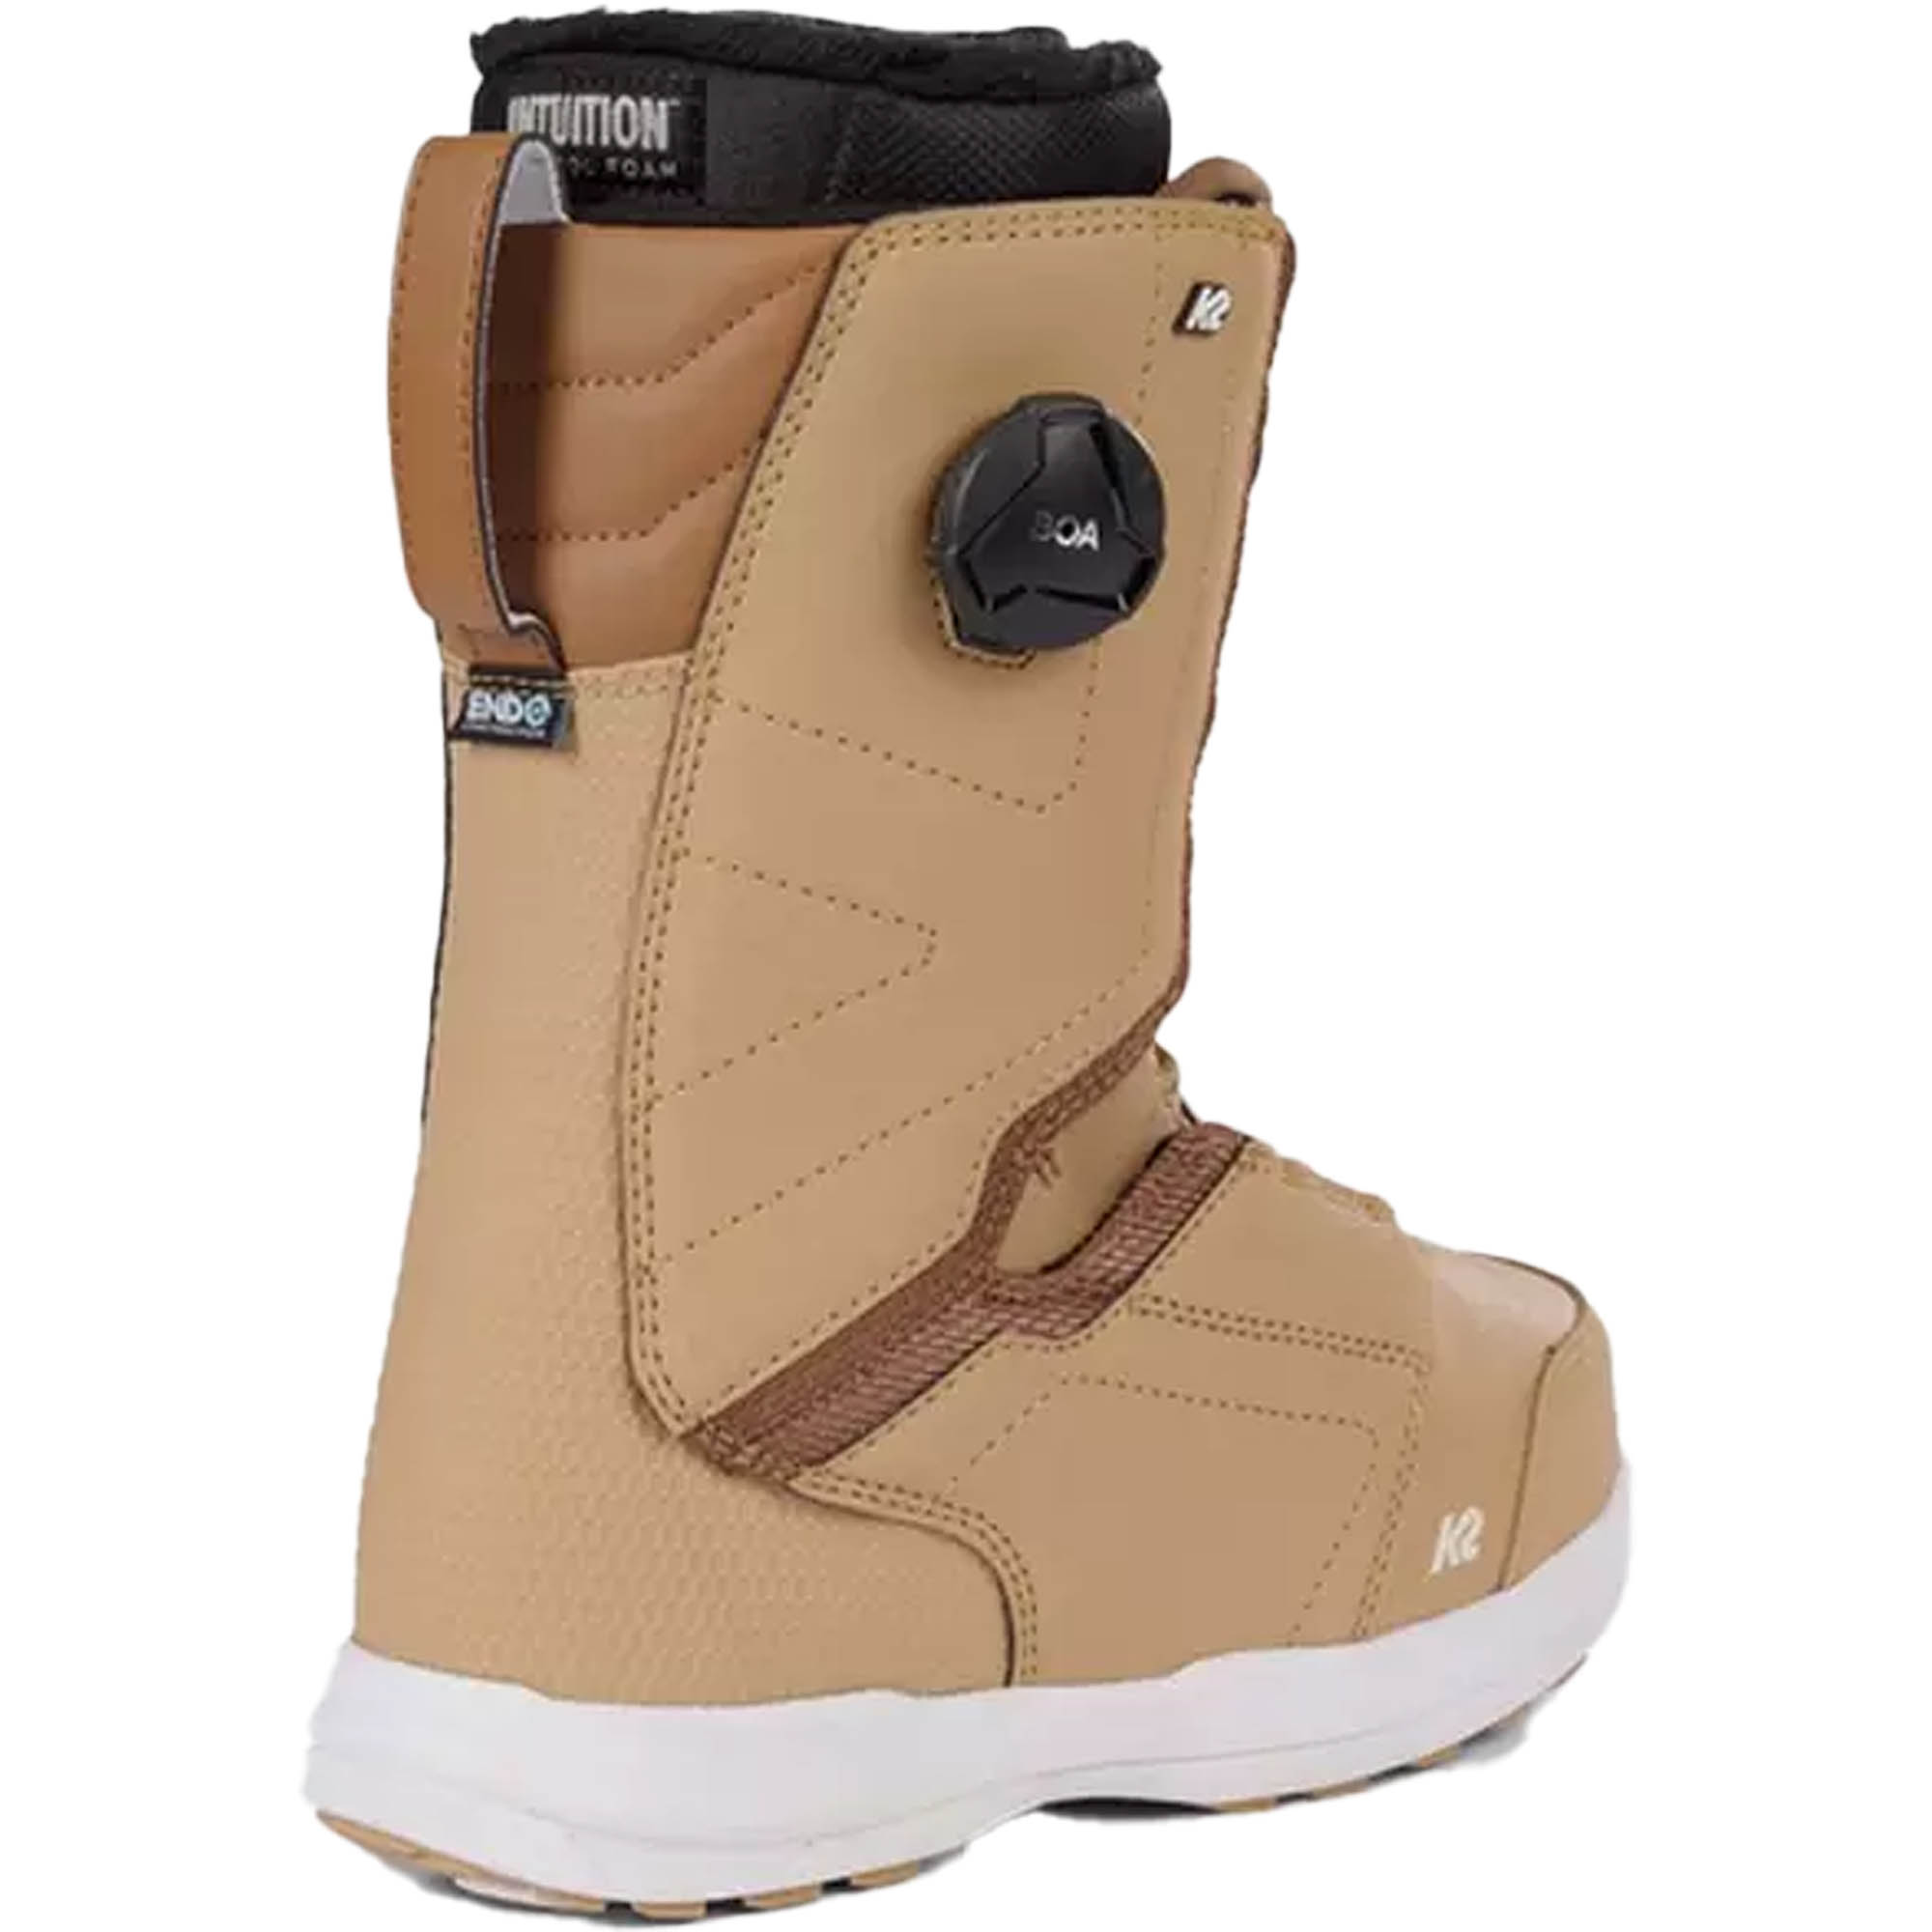 K2 Trance Women's BOA Fit System Snowboard Boots